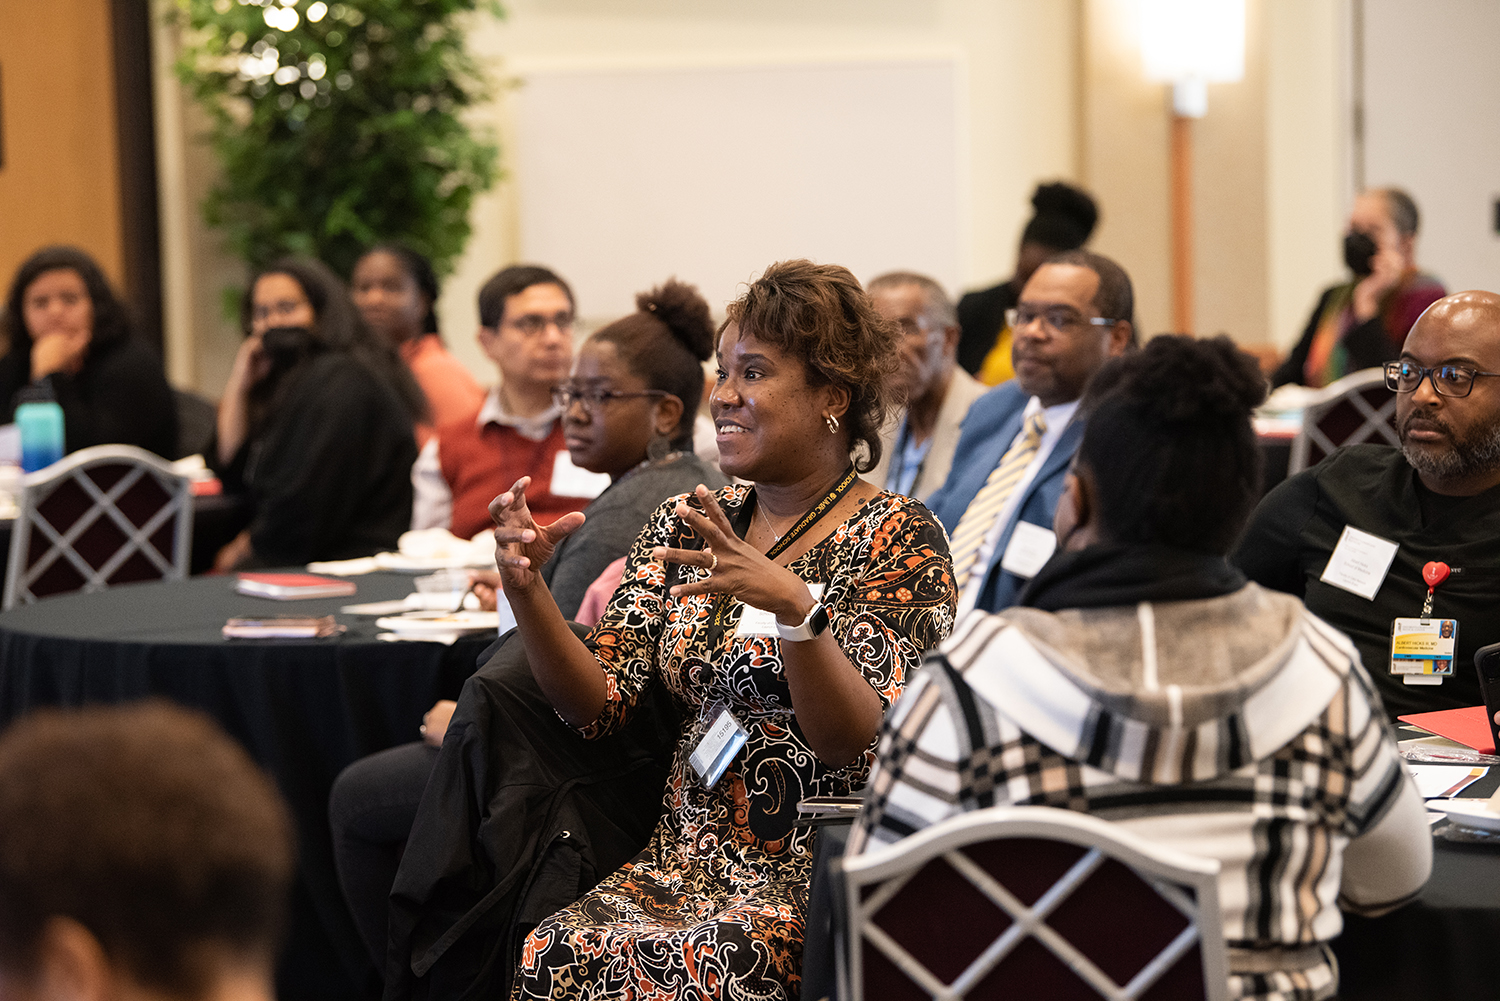 Laundette Jones, PhD, MPH, associate professor at the University of Maryland School of Medicine, speaks at the Faculty of Color Network launch event in late November.